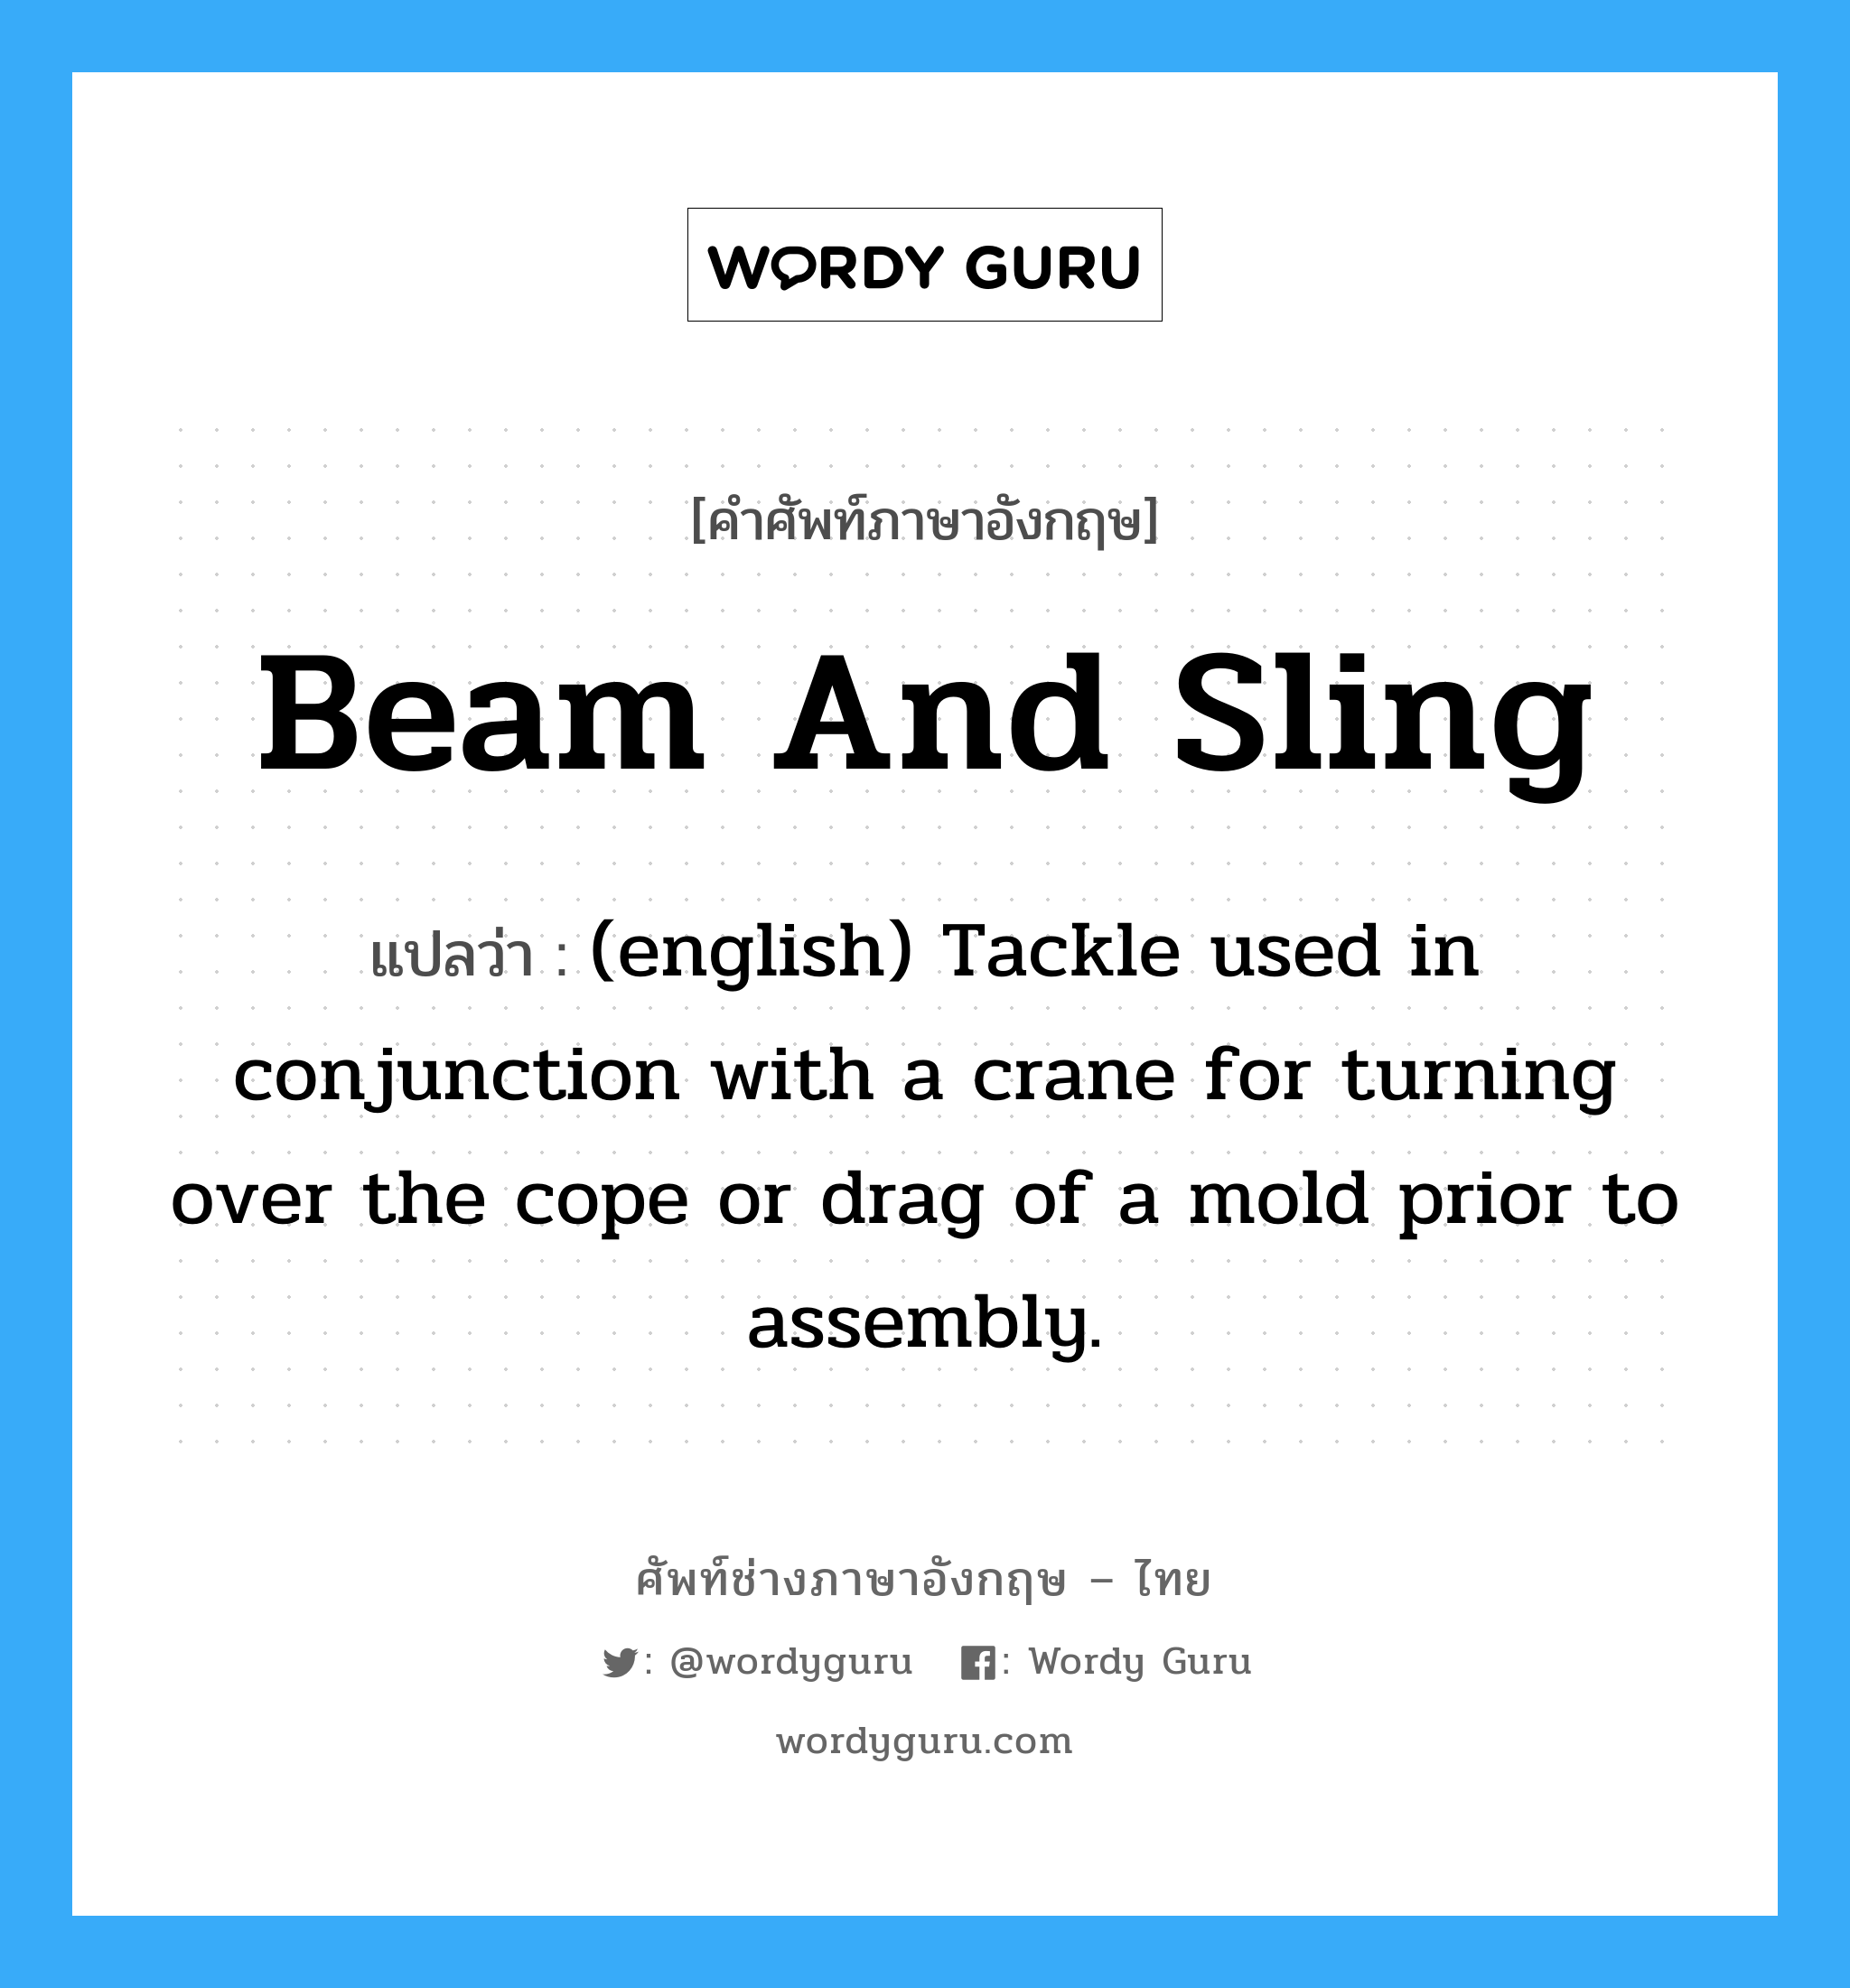 (english) Tackle used in conjunction with a crane for turning over the cope or drag of a mold prior to assembly. ภาษาอังกฤษ?, คำศัพท์ช่างภาษาอังกฤษ - ไทย (english) Tackle used in conjunction with a crane for turning over the cope or drag of a mold prior to assembly. คำศัพท์ภาษาอังกฤษ (english) Tackle used in conjunction with a crane for turning over the cope or drag of a mold prior to assembly. แปลว่า Beam and Sling